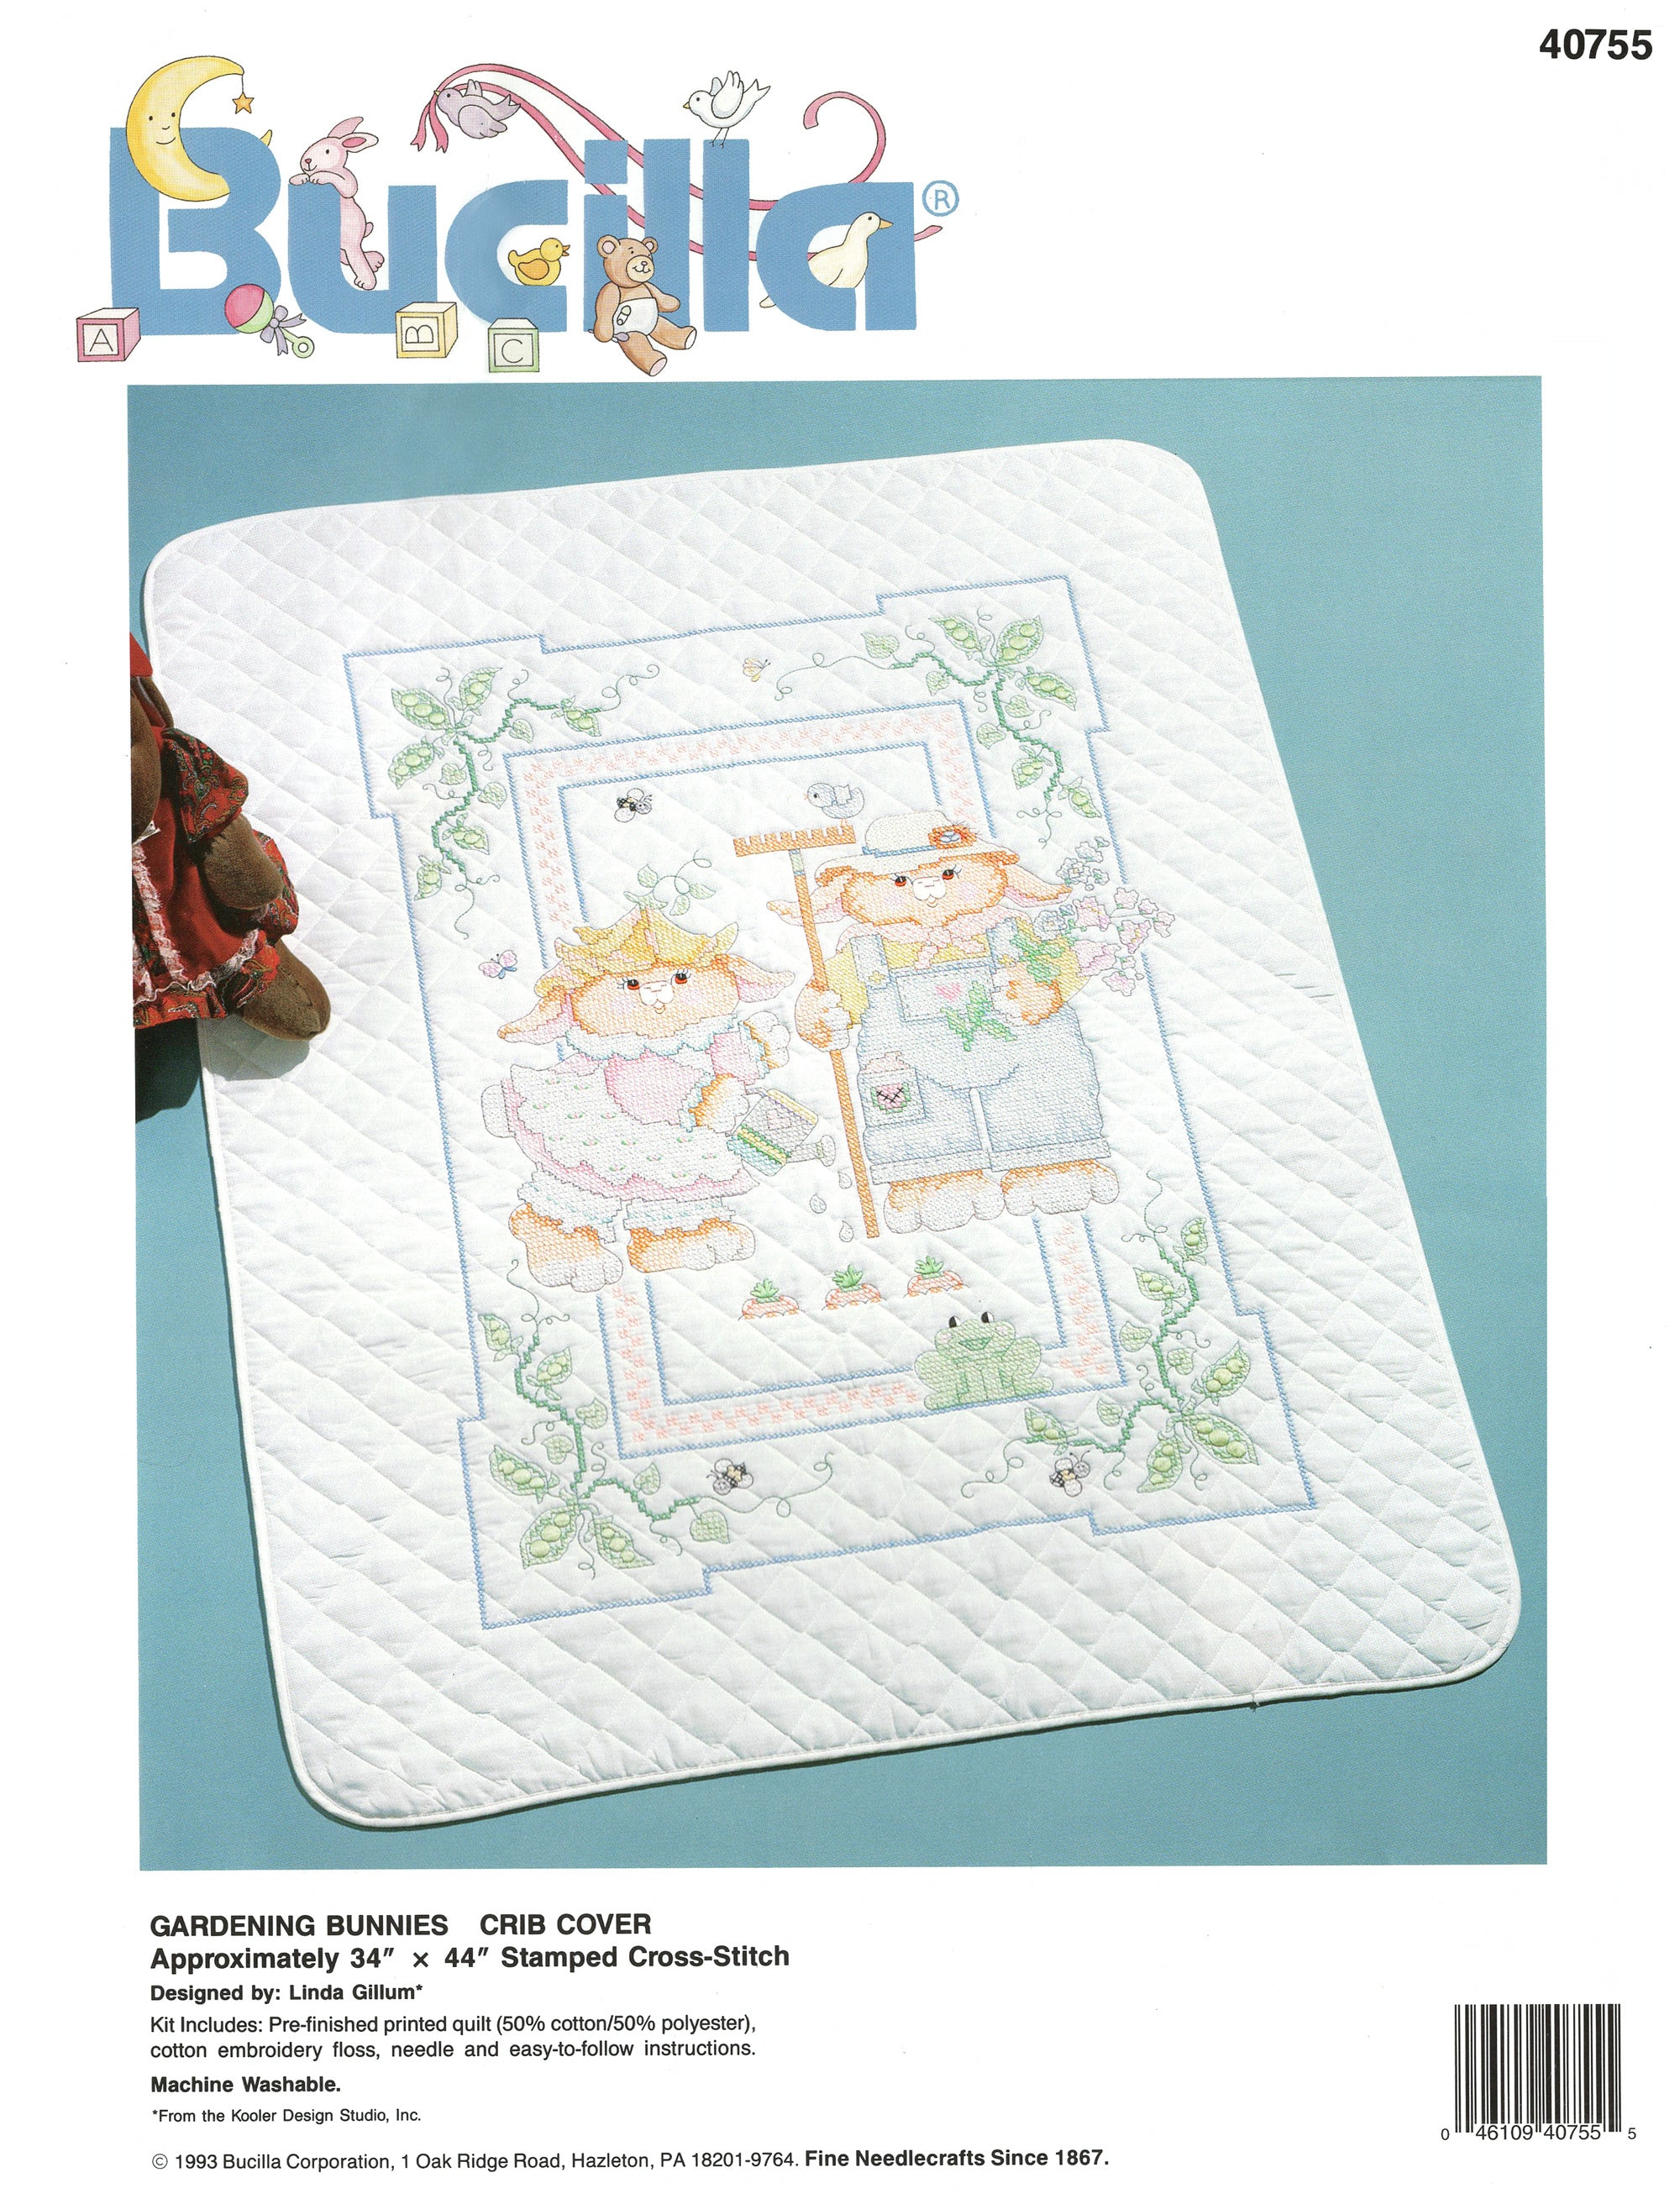 Bucilla gardening Bunnies Stamped Cross Stitch Crib Cover Kit 40755 34 X 43  Pre-quilted Just Embroider and Give to the New Baby 